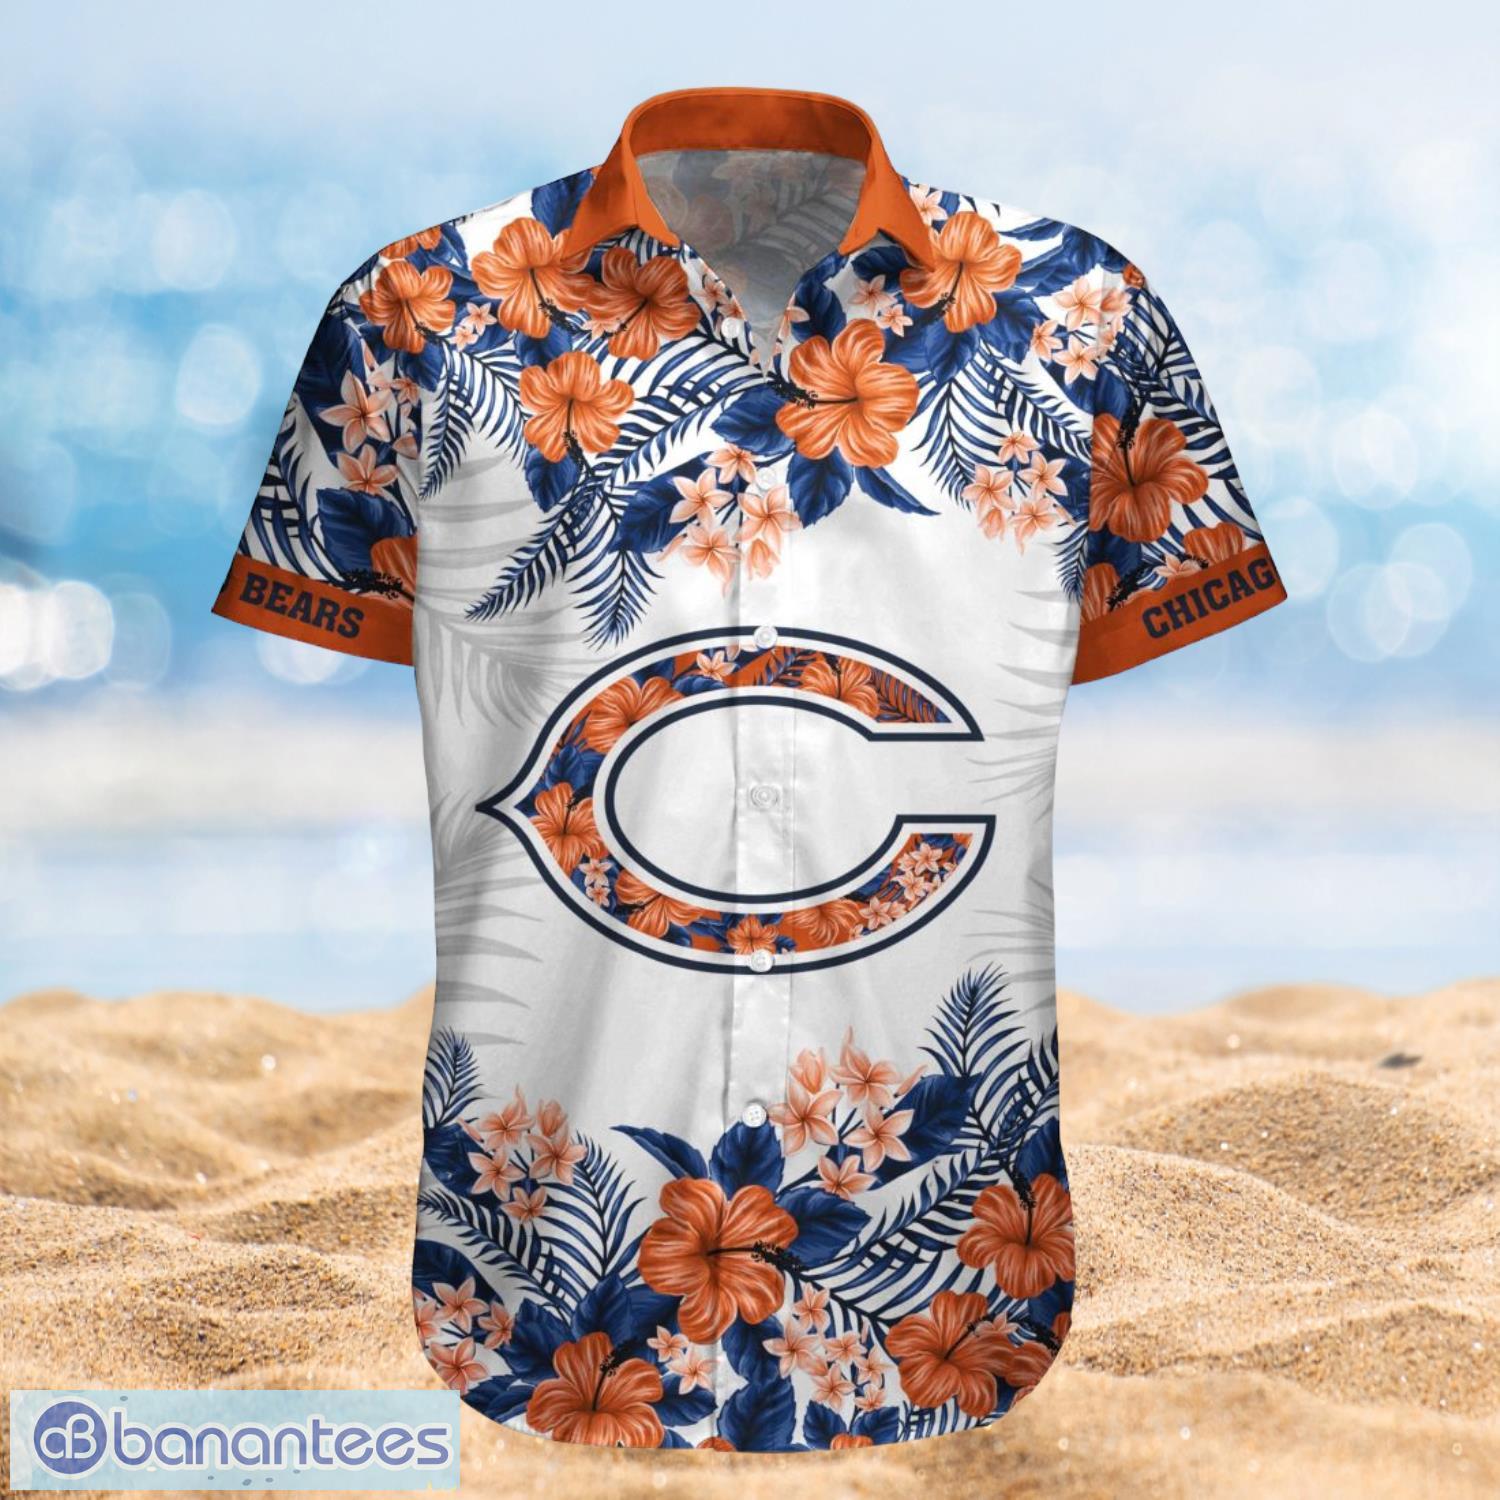 Chicago Bears Summer Beach Shirt and Shorts Full Over Print Product Photo 1